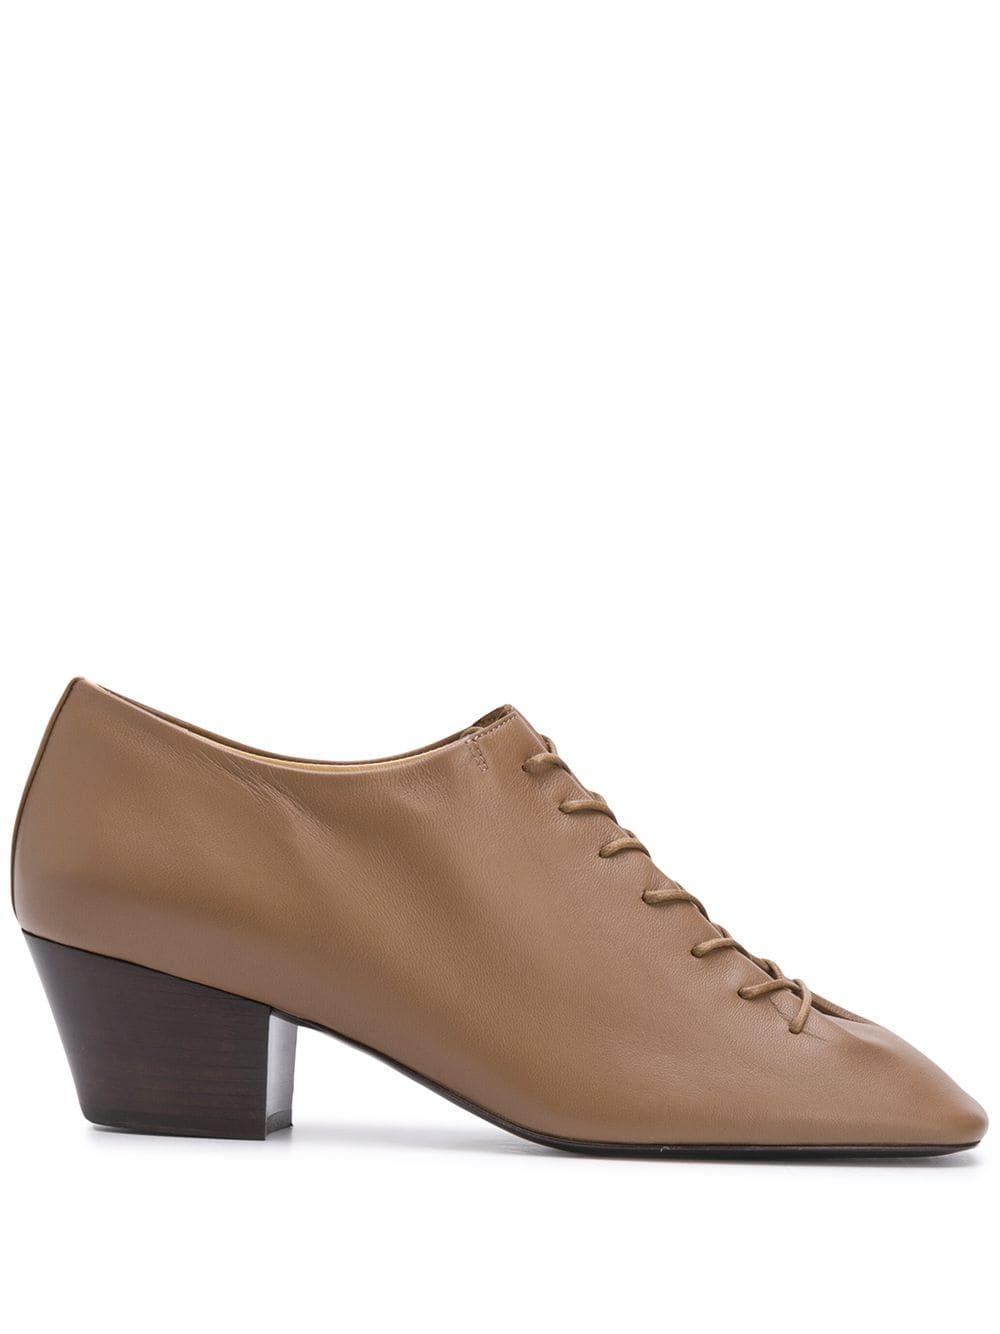 Lemaire Leather Heeled Lace-up Shoes in Brown - Lyst